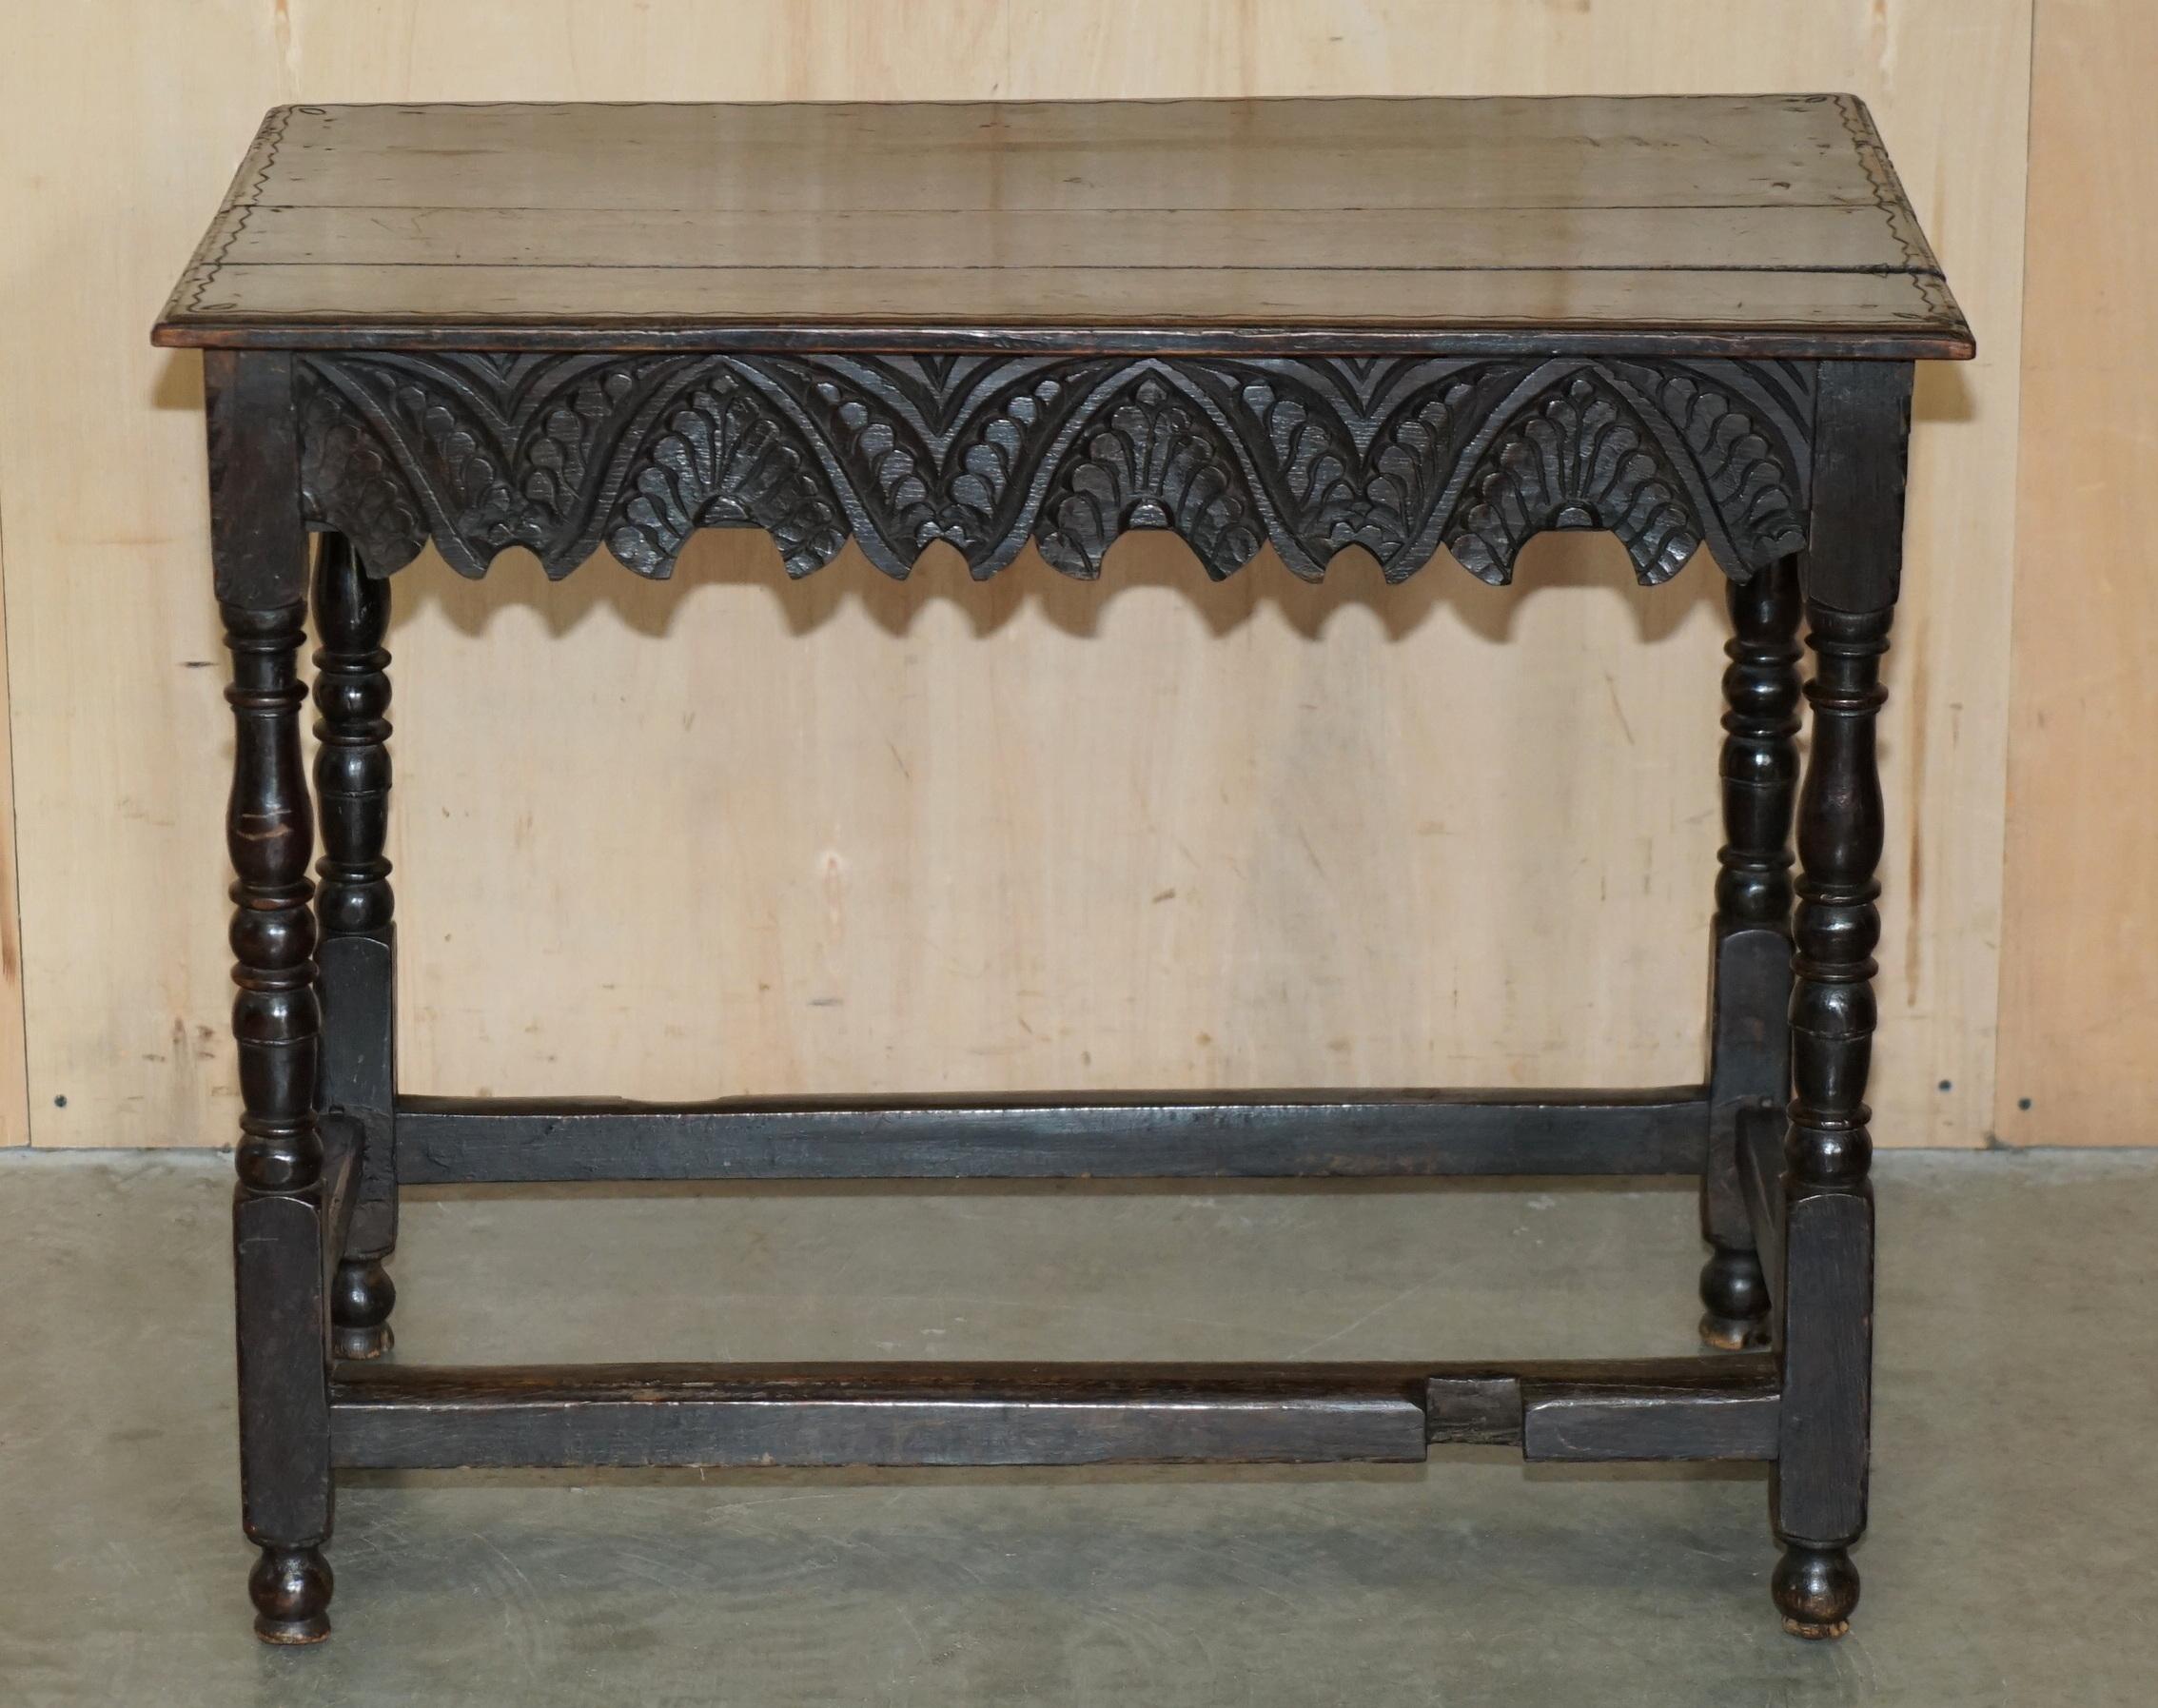 Royal House Antiques

Royal House Antiques is delighted to offer for sale this lovely 18th century circa 1720 English oak hand carved centre table with very decorative apron 

Please note the delivery fee listed is just a guide, it covers within the